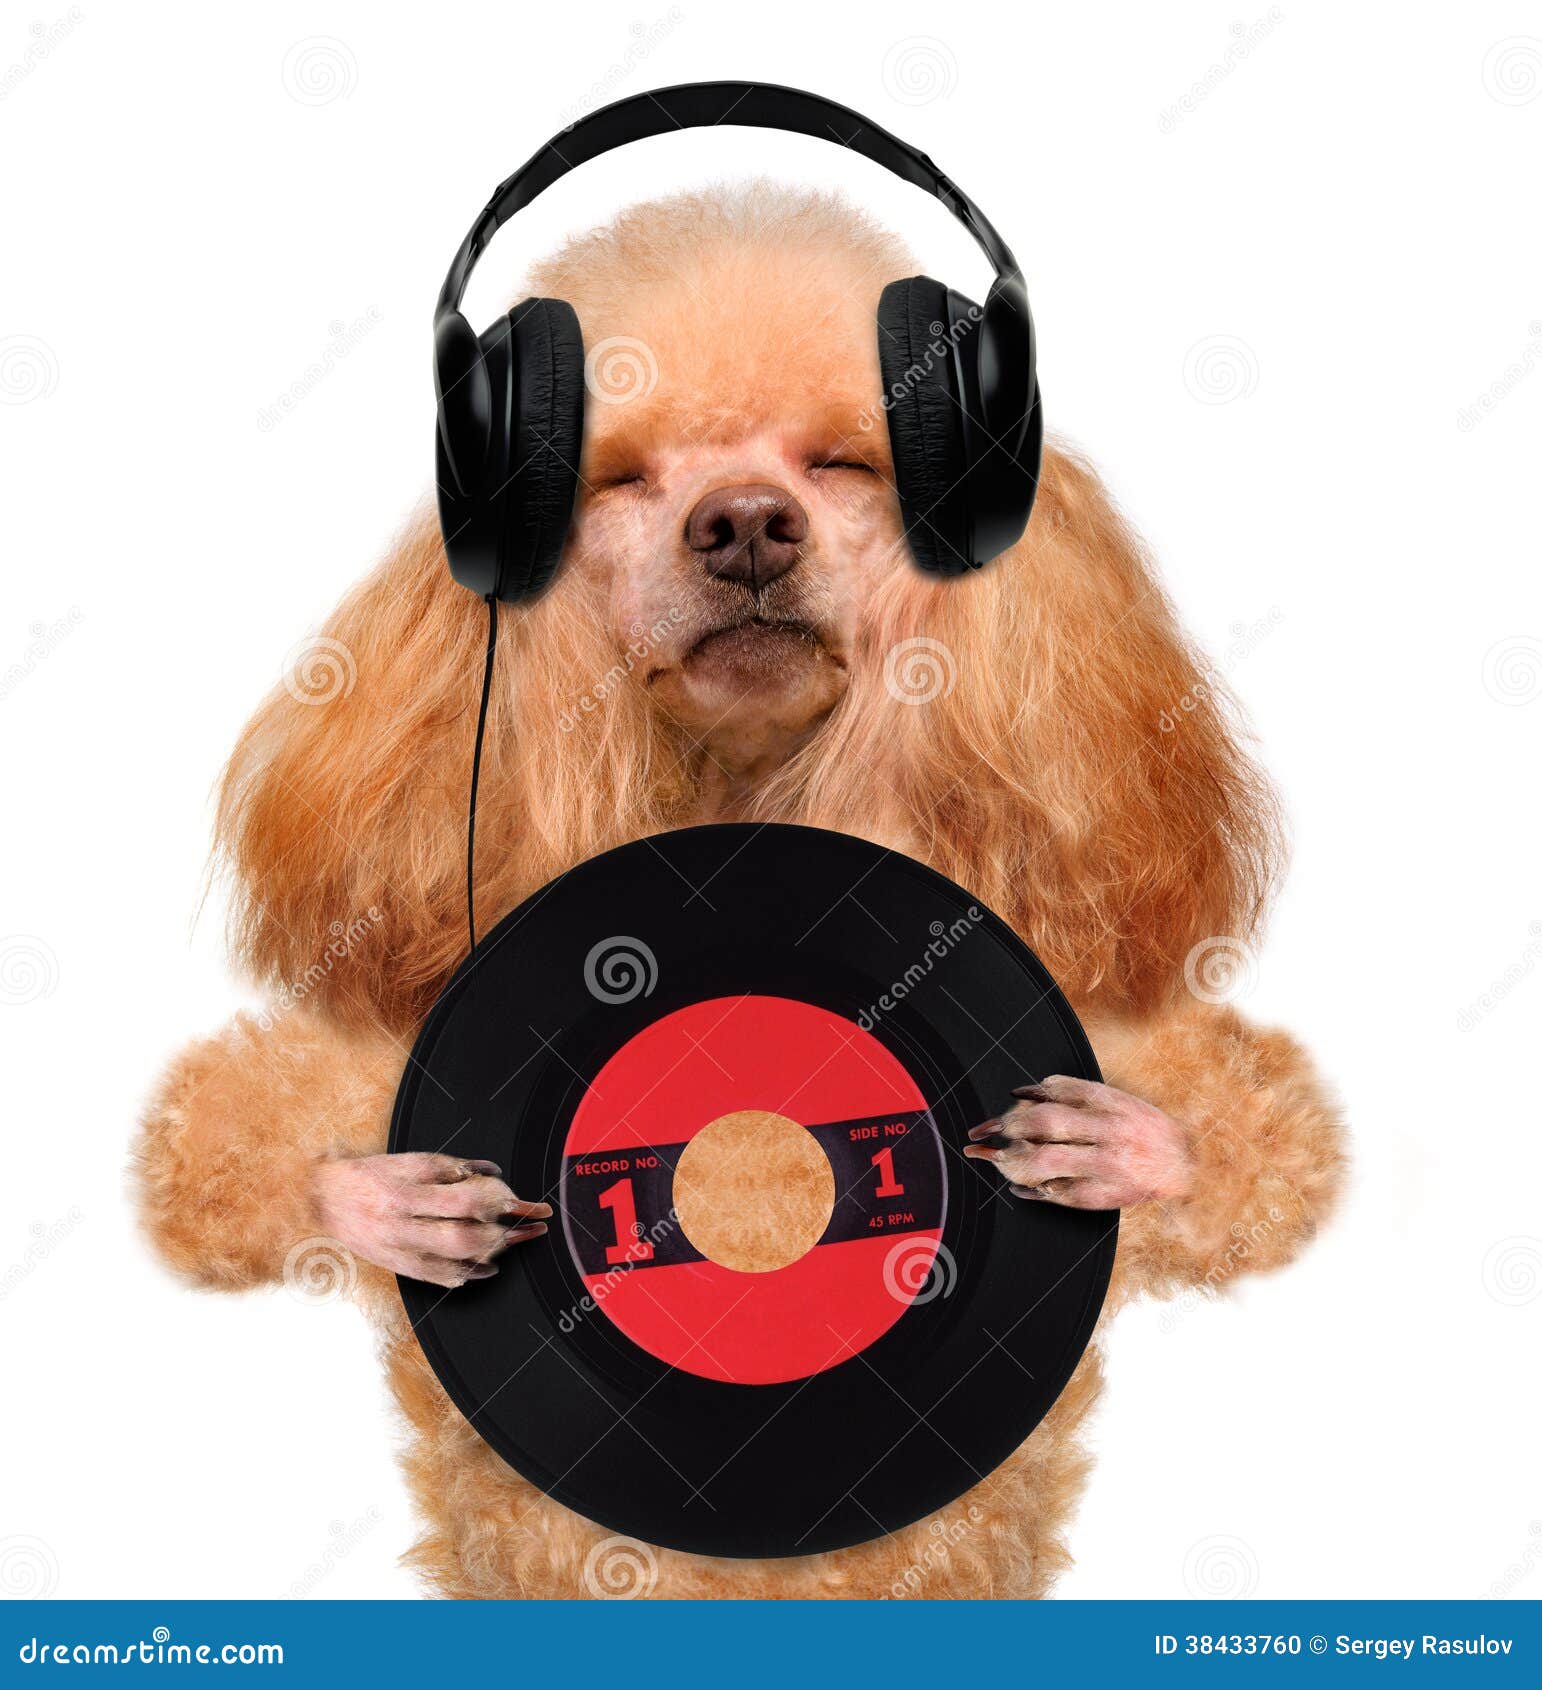 Headphones and Animals Wallpapers High Quality | Download Free